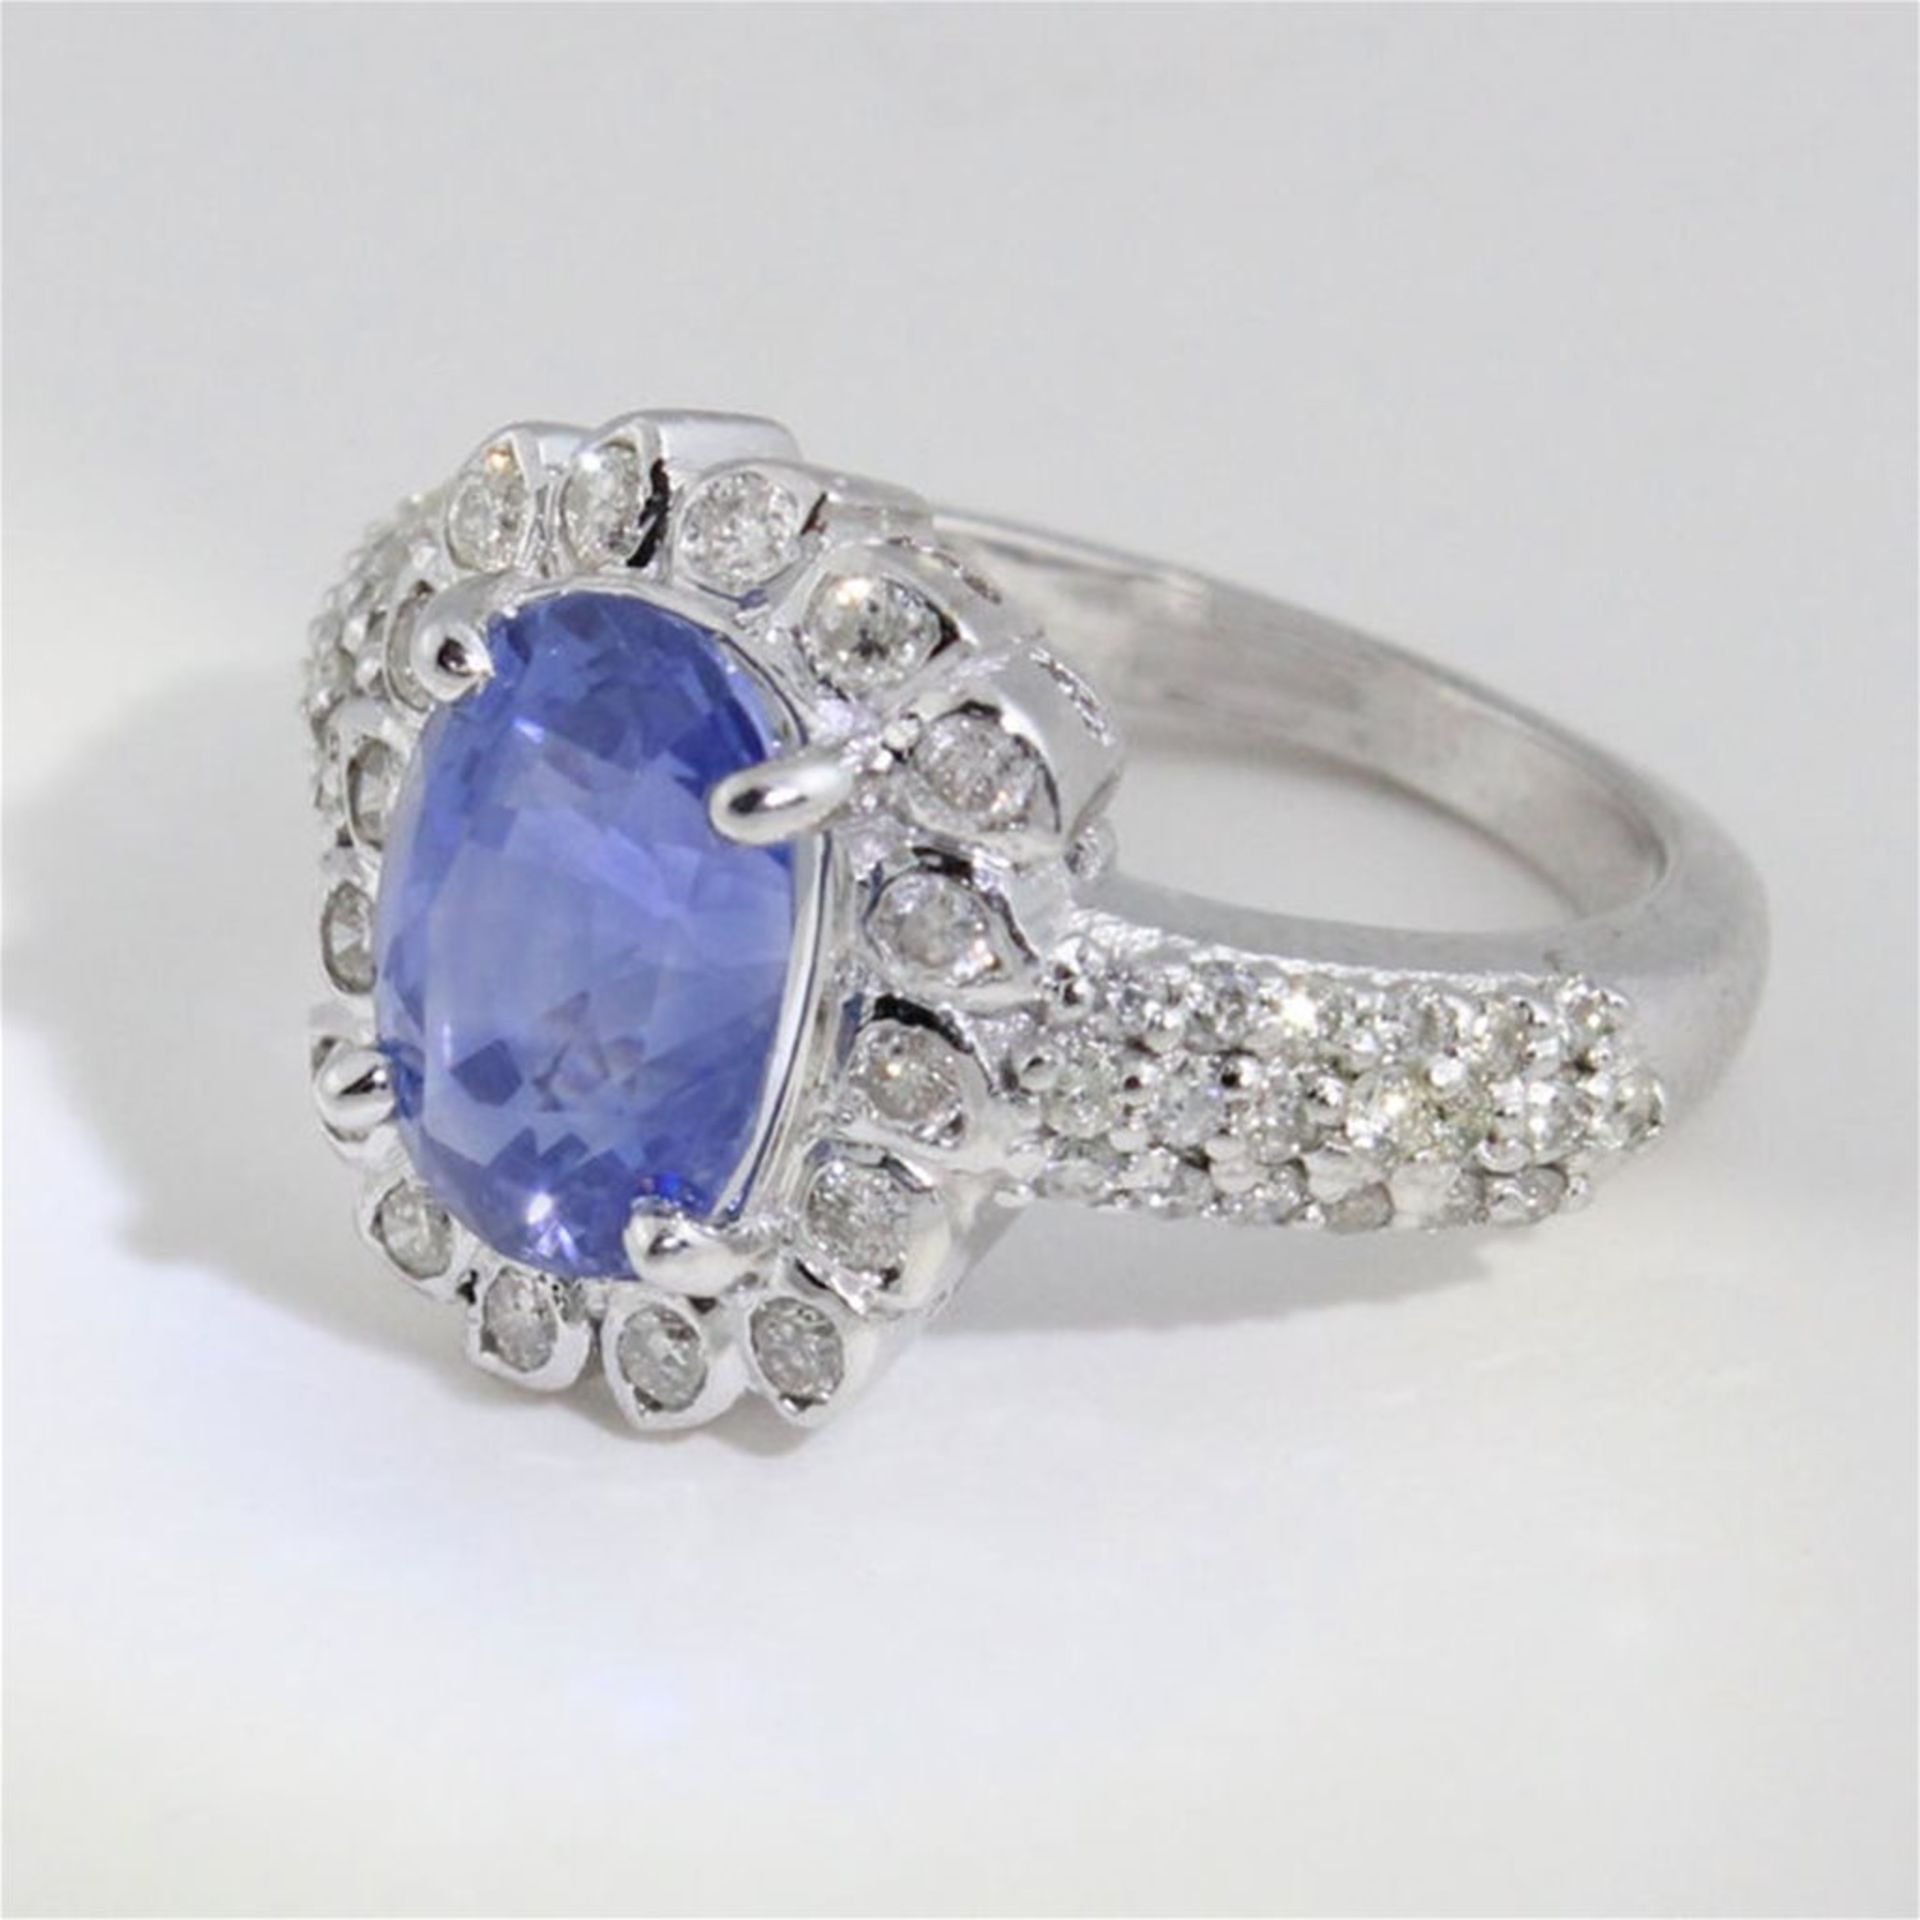 IGI Certified 14 K Very Exclusive Designer White Gold Blue Sapphire and Diamond Ring - Image 2 of 7